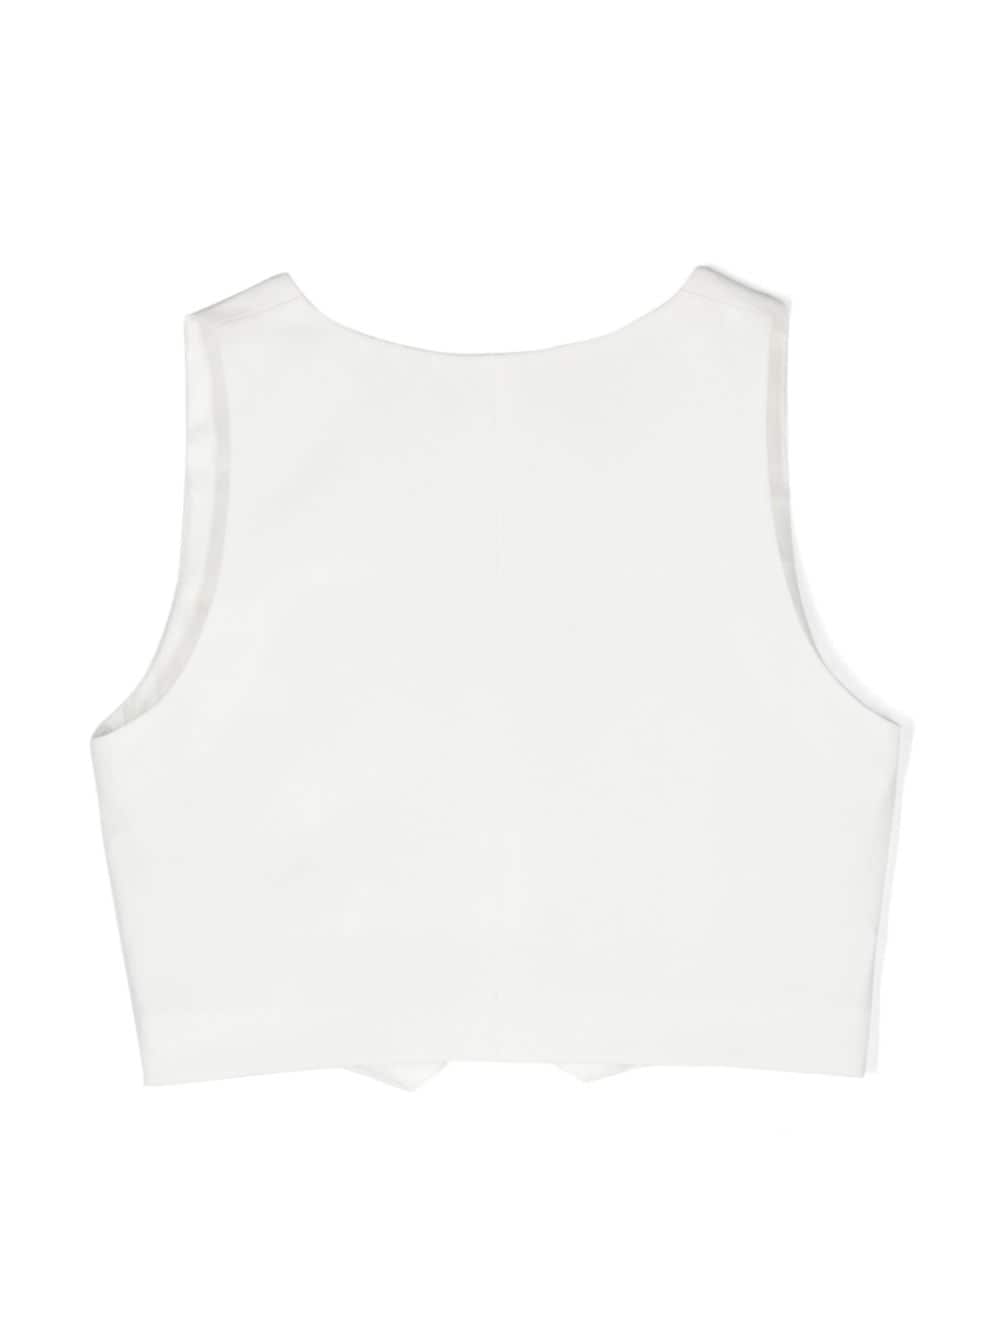 White vest for girls with logo plaque